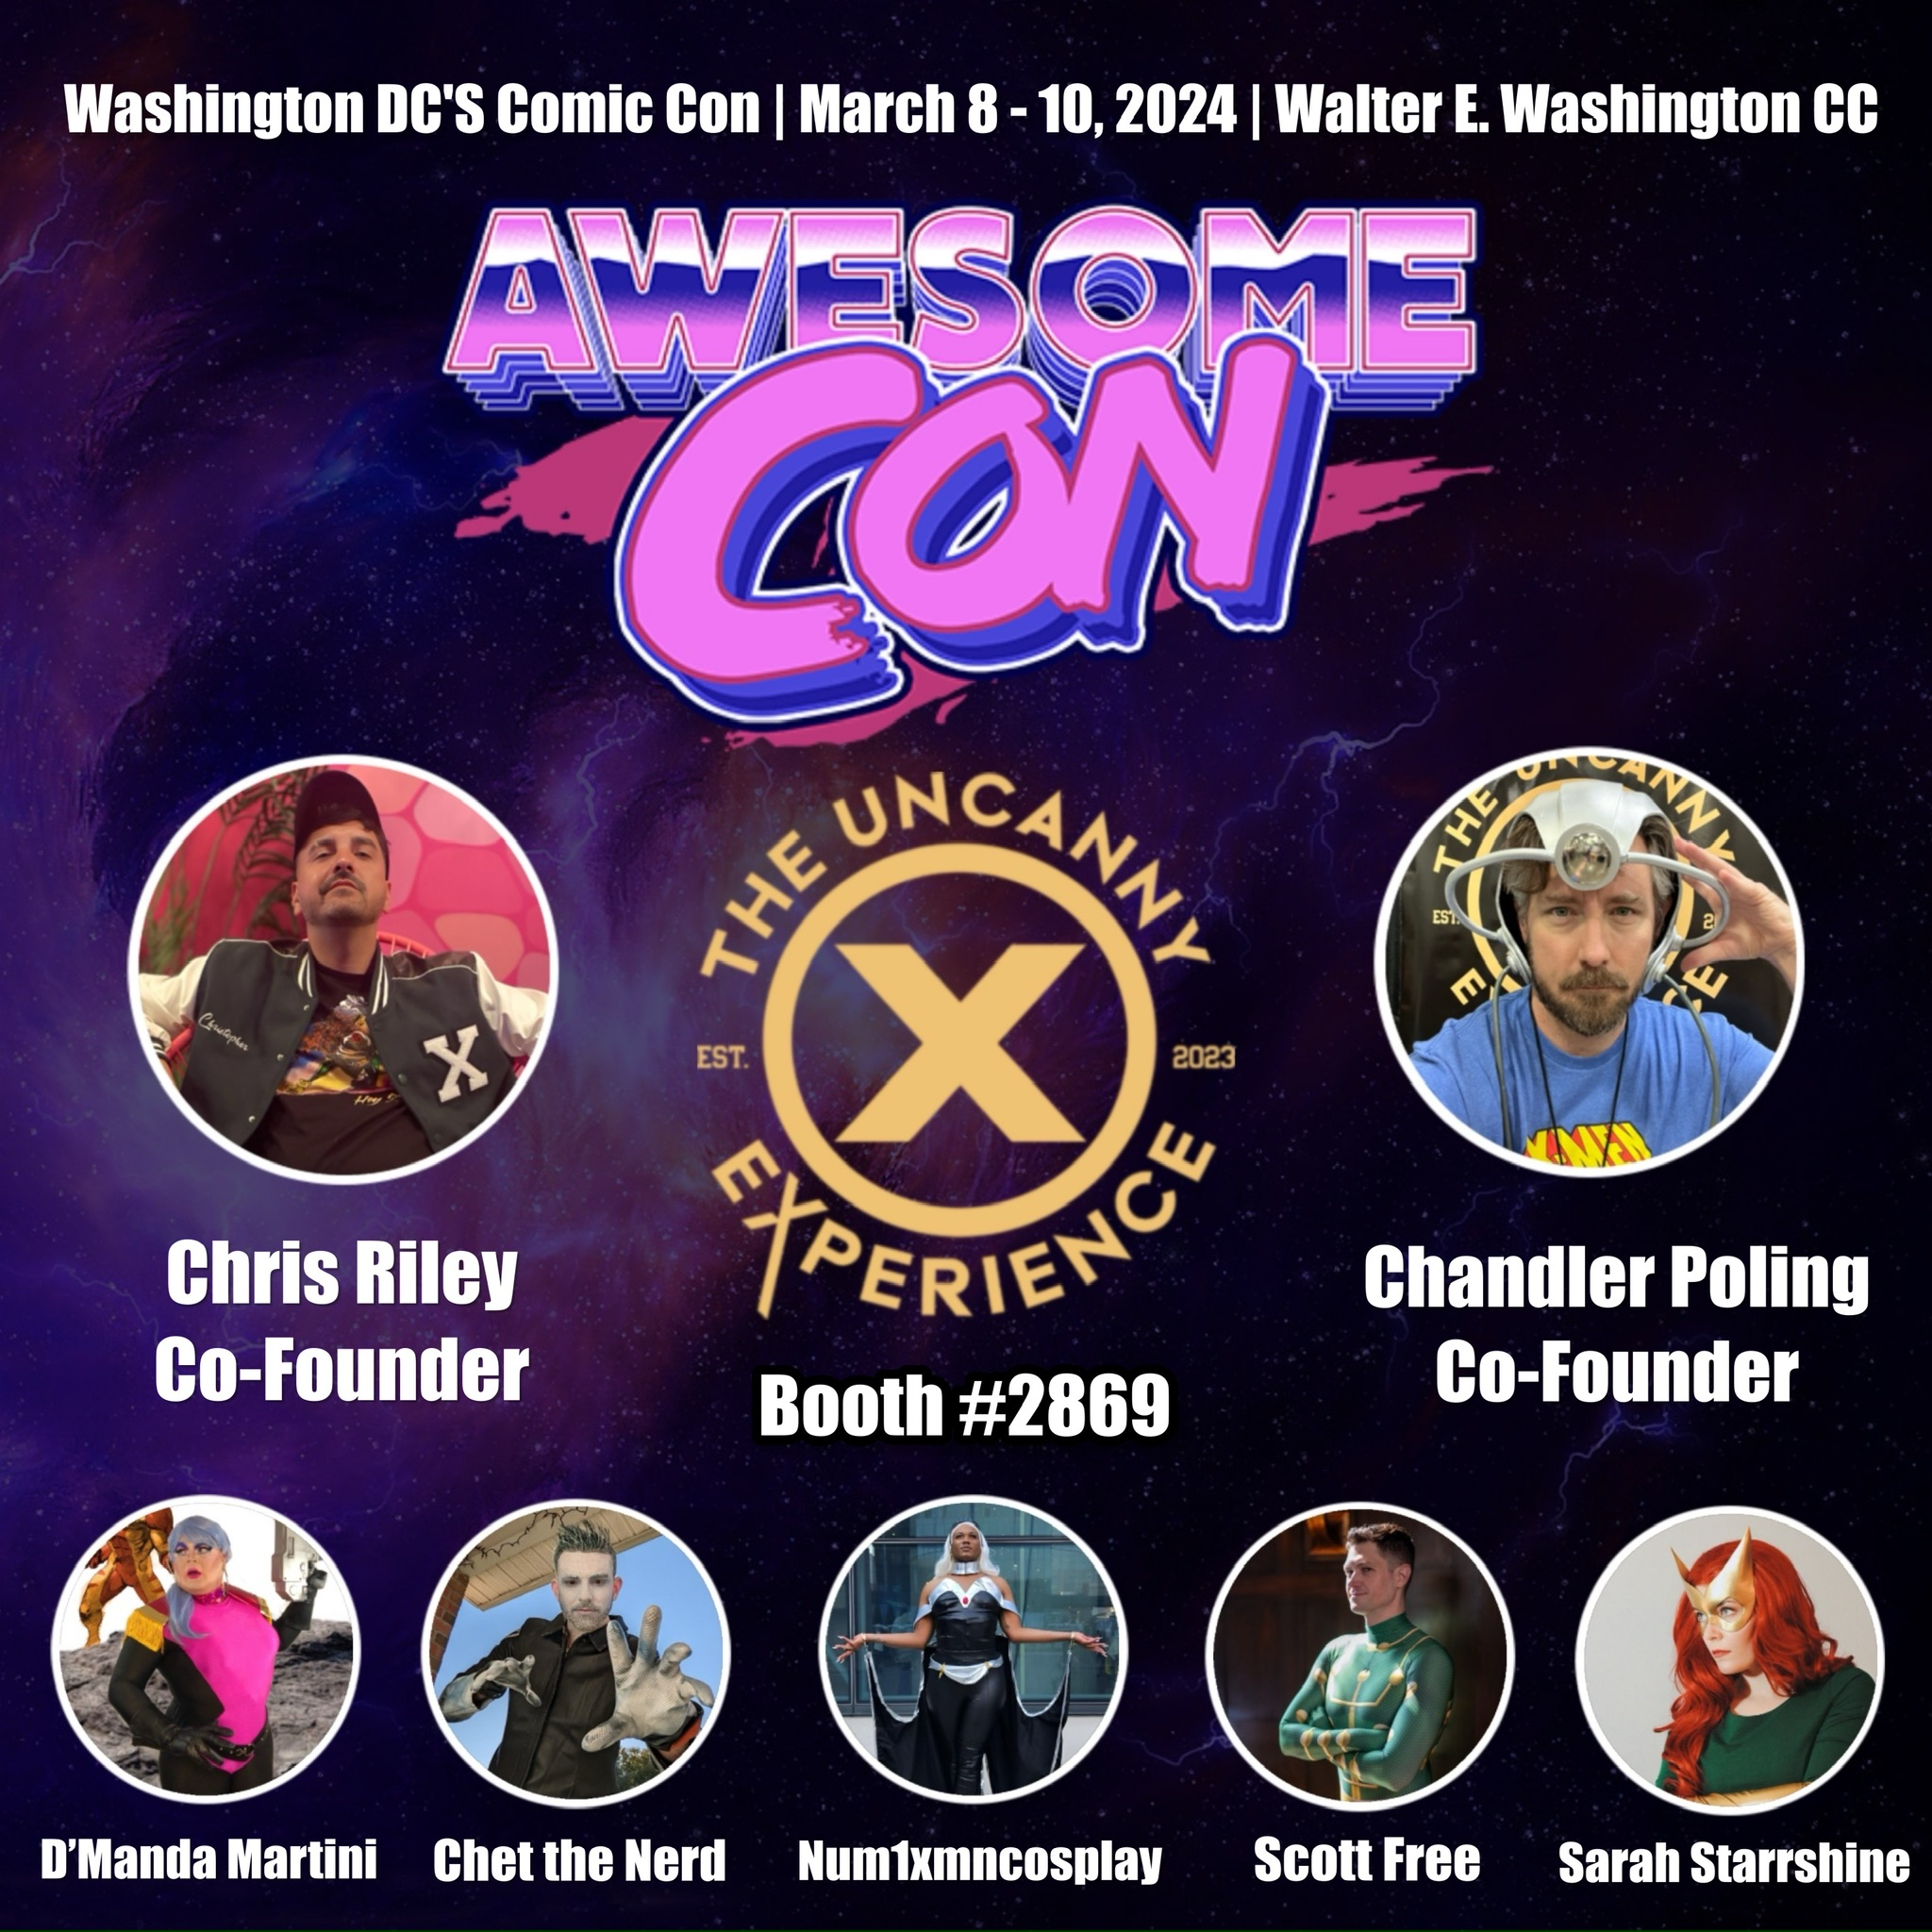 The Uncanny Experience Booth to appear at AwesomeCon